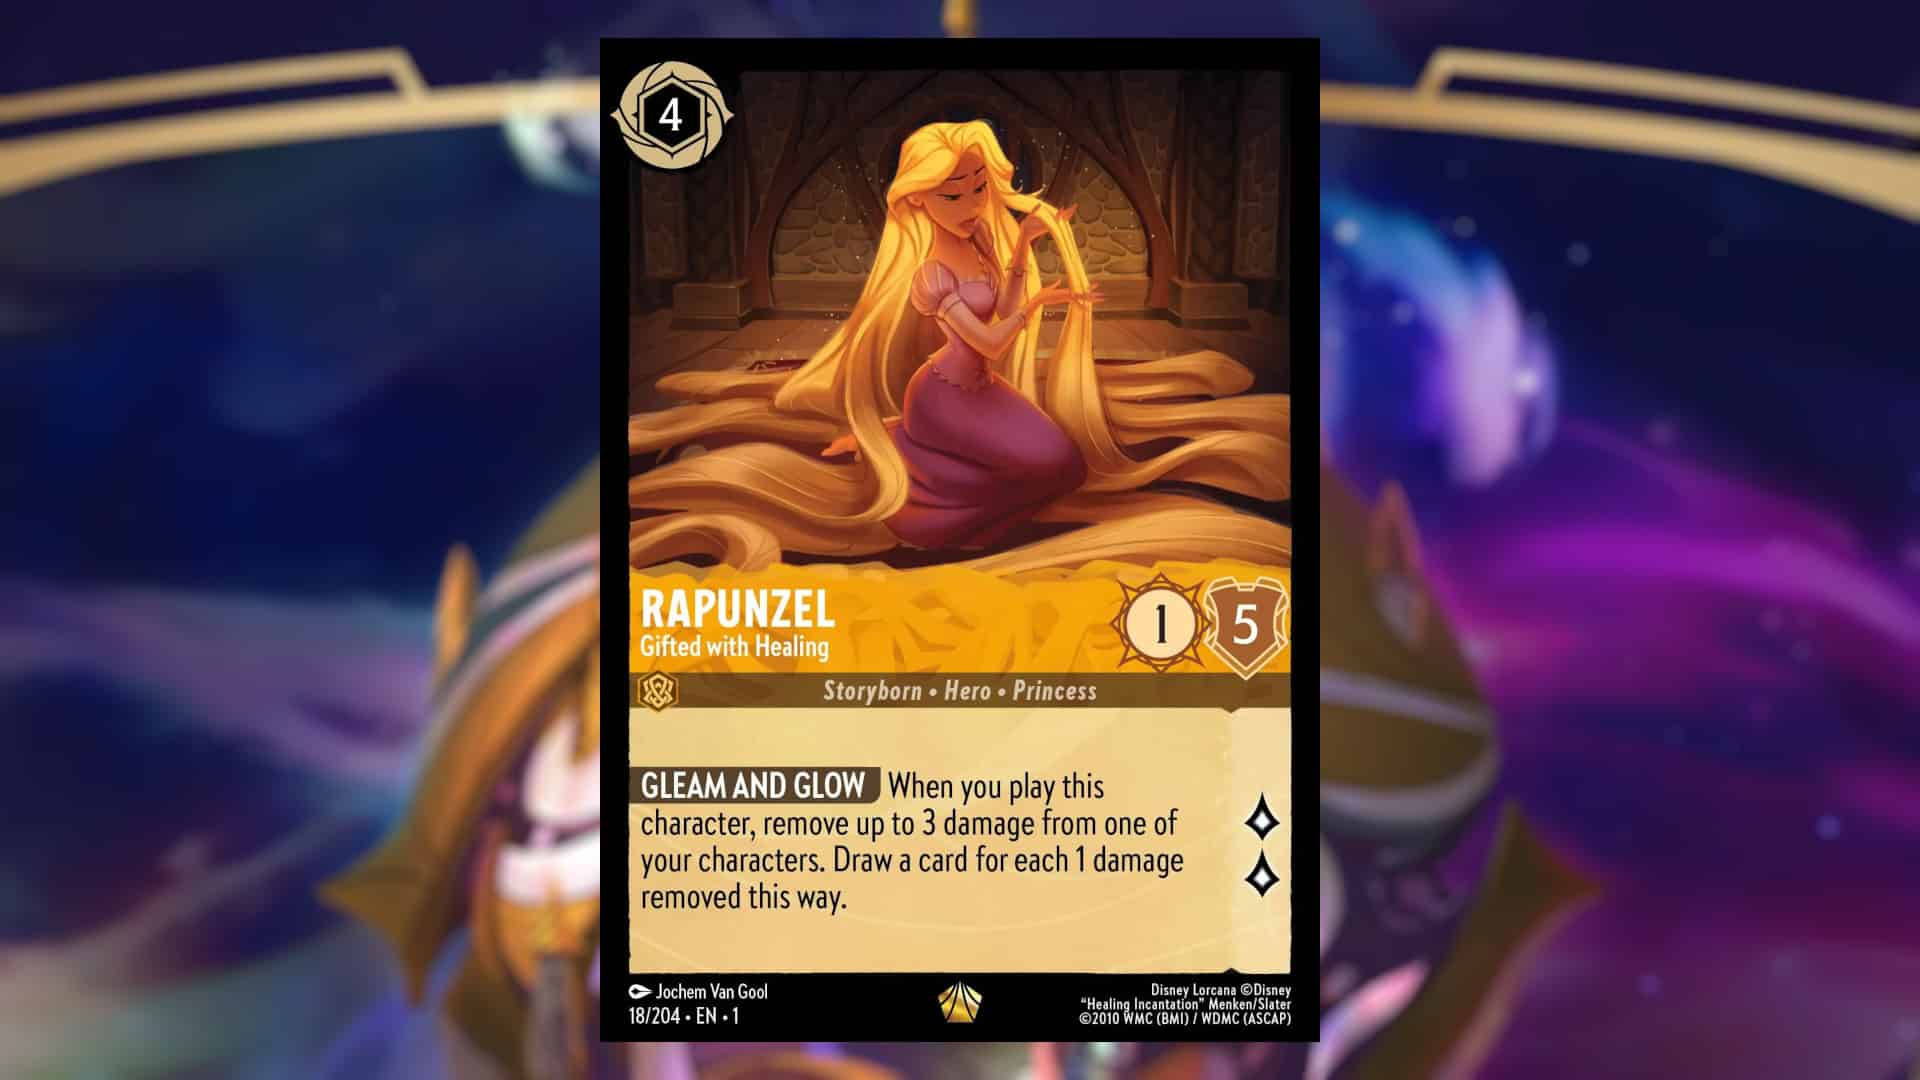 Picture of Rapunzel - Gifted with Healing from Disney Lorcana